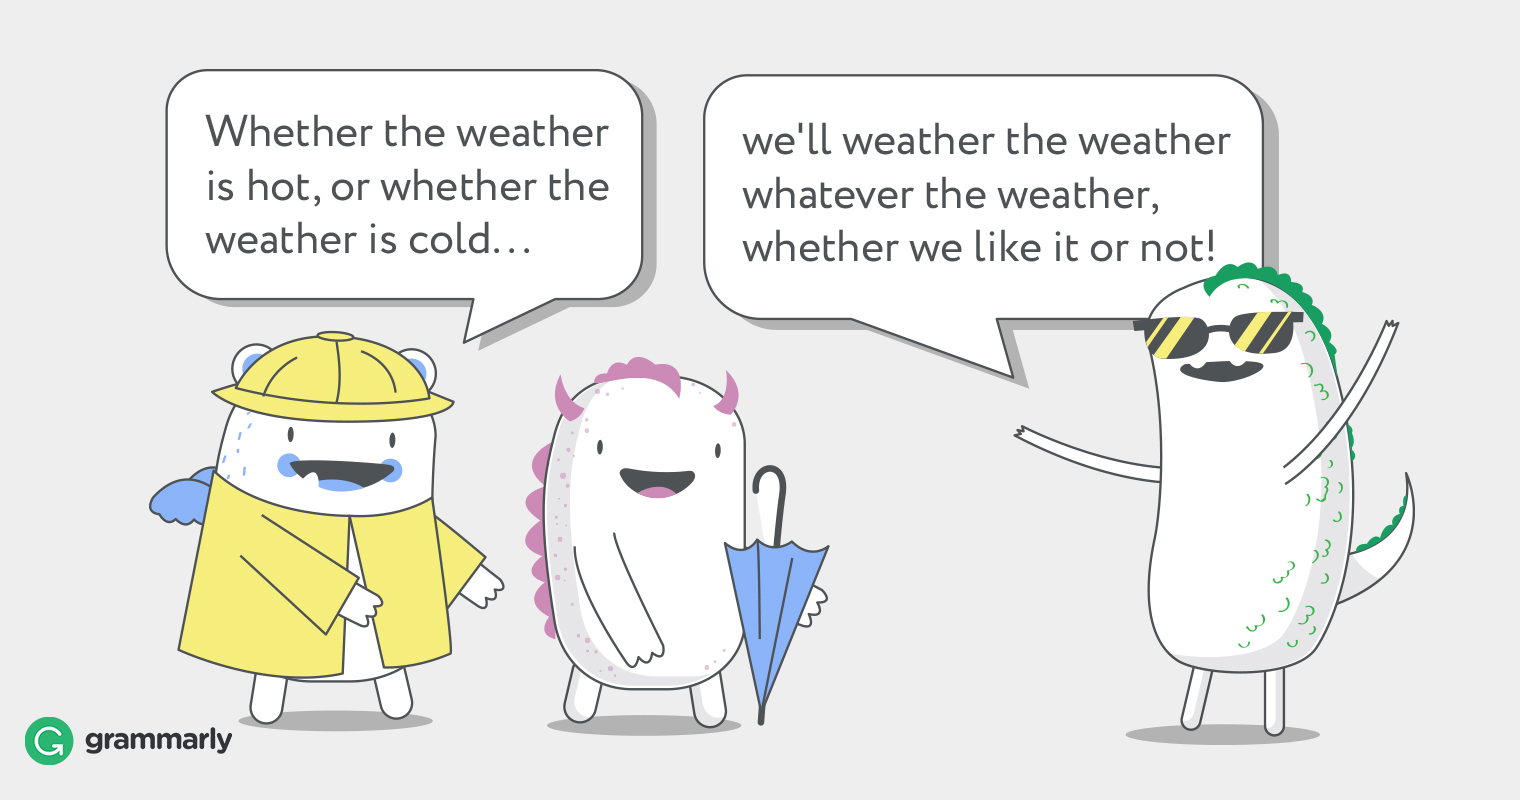 wether, weather, whether—what's the difference? | grammarly